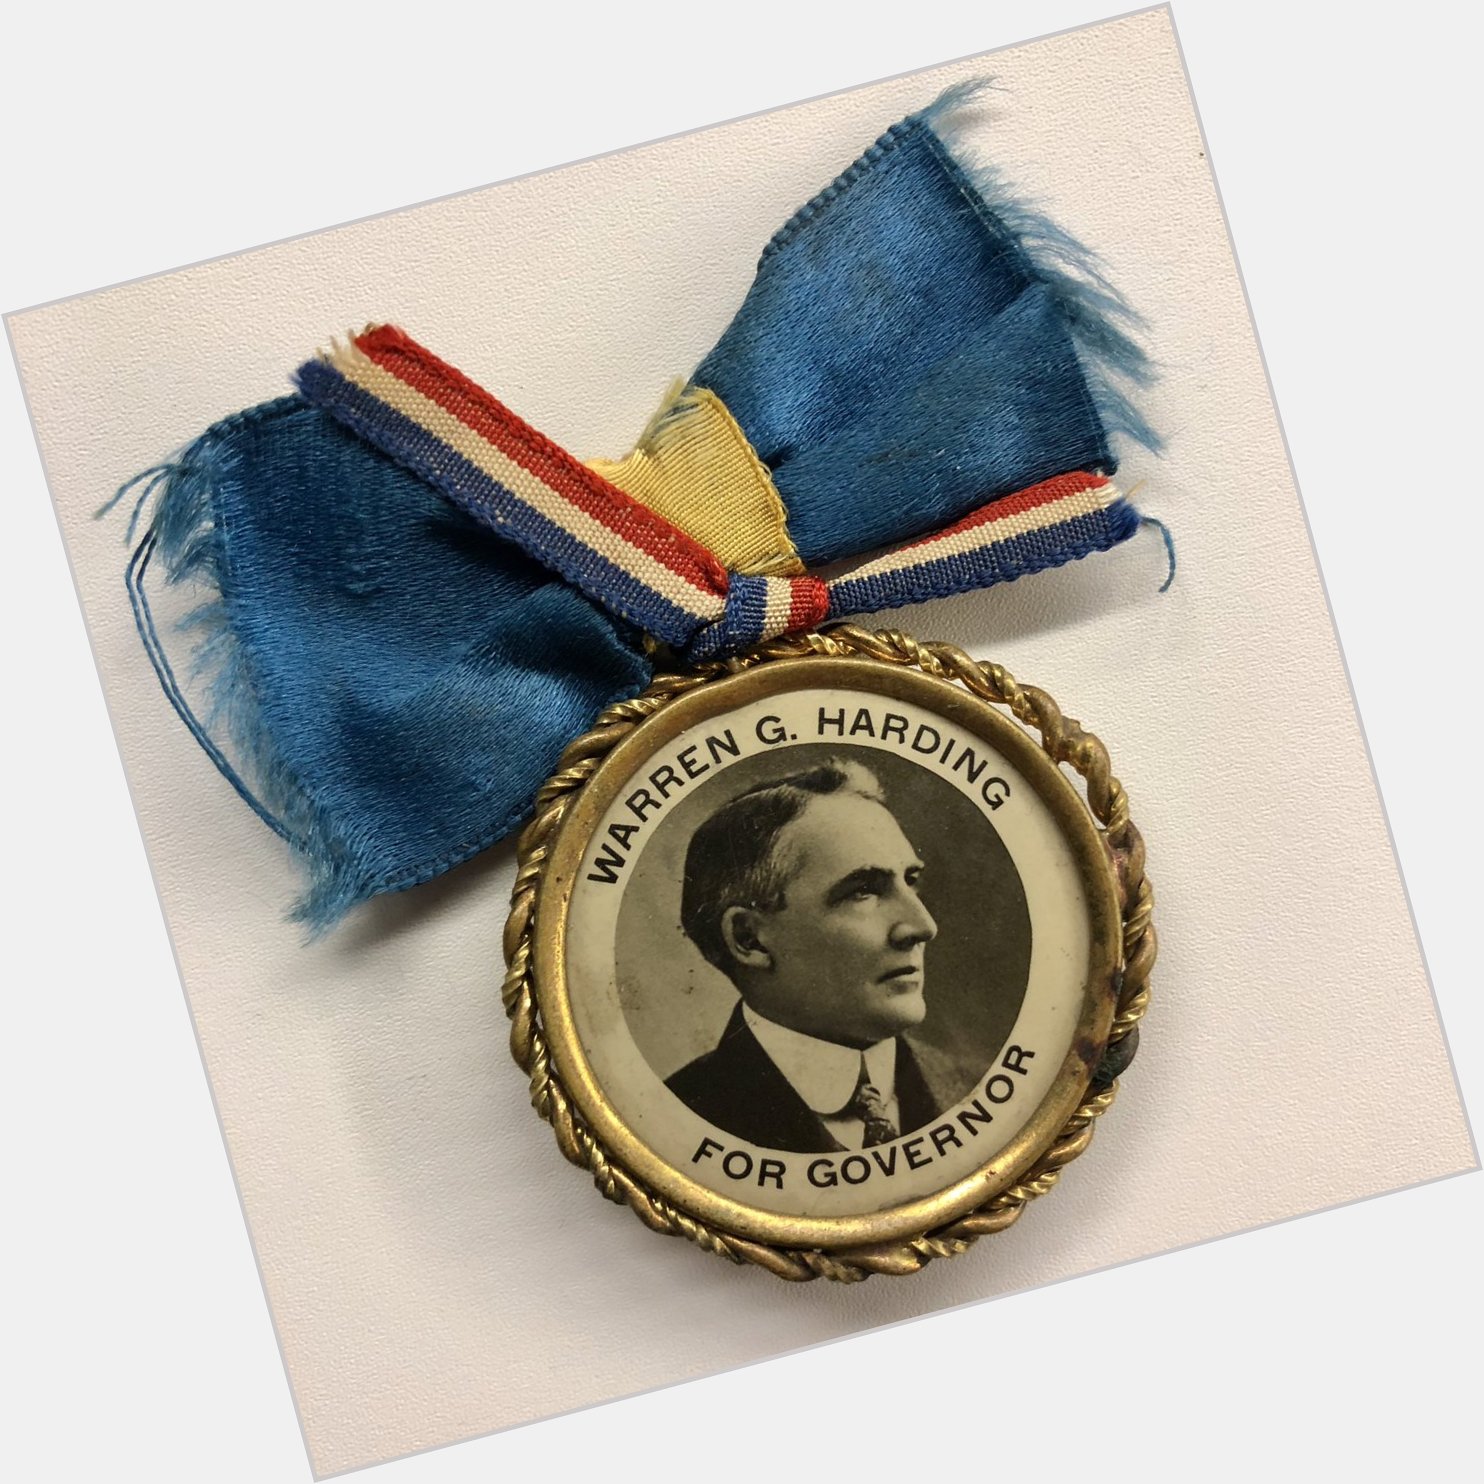 Happy 157th birthday to President Warren G. Harding (R-OH). This button is from his losing 1910 run for Governor 